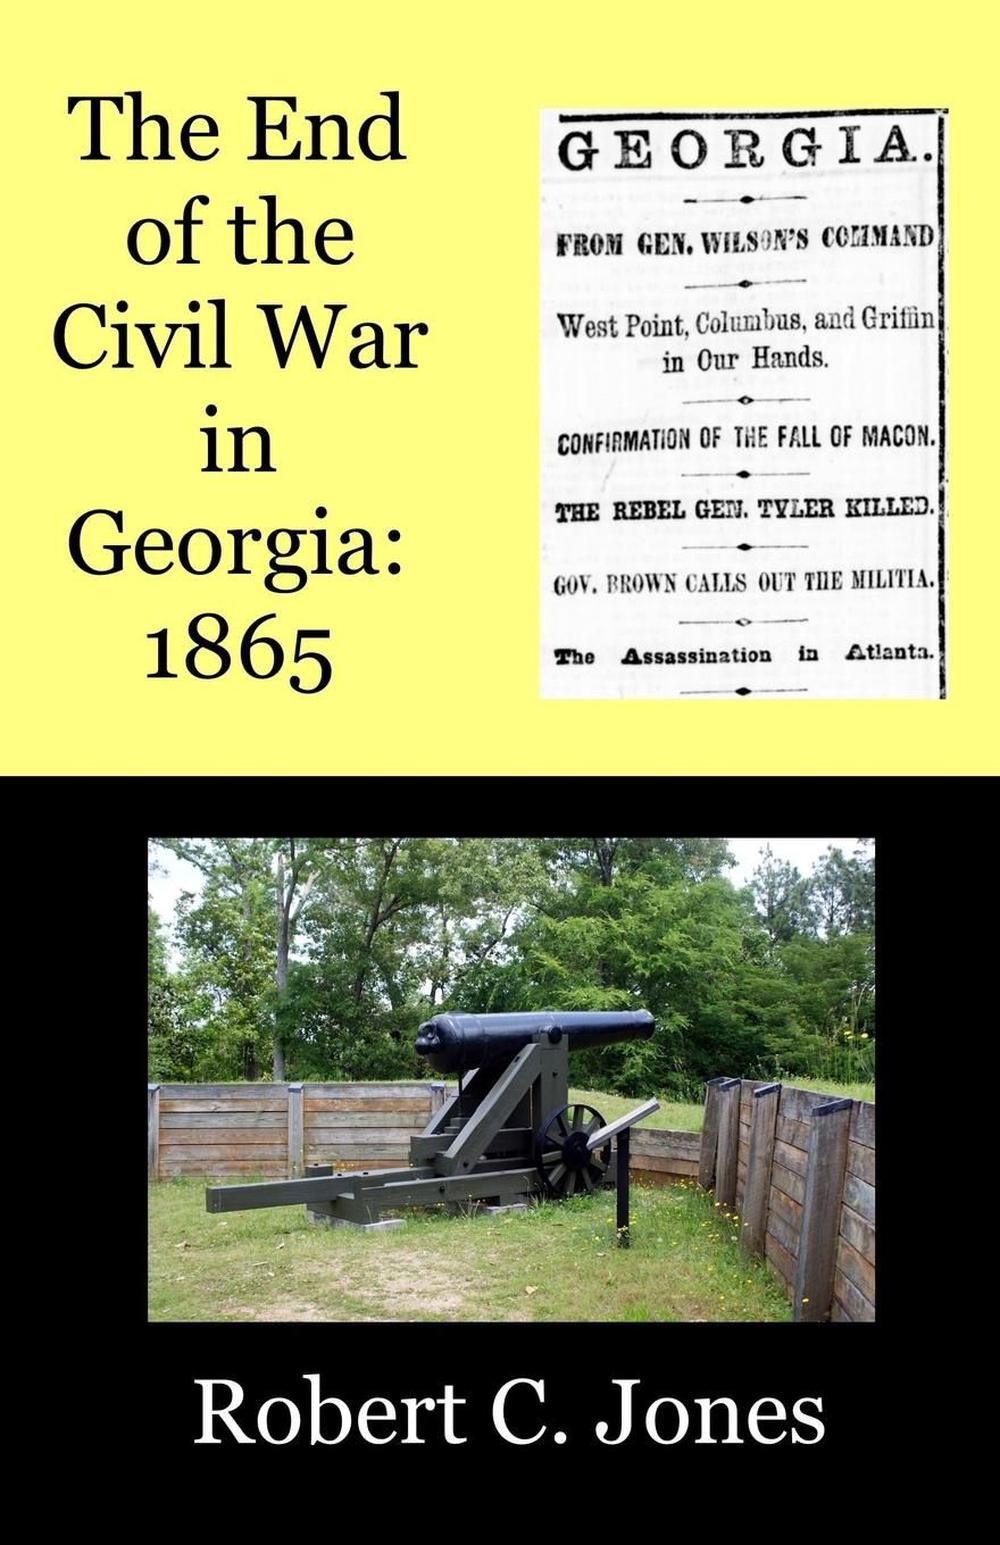 The strategy used in the south at the end of the Civil War was called what?